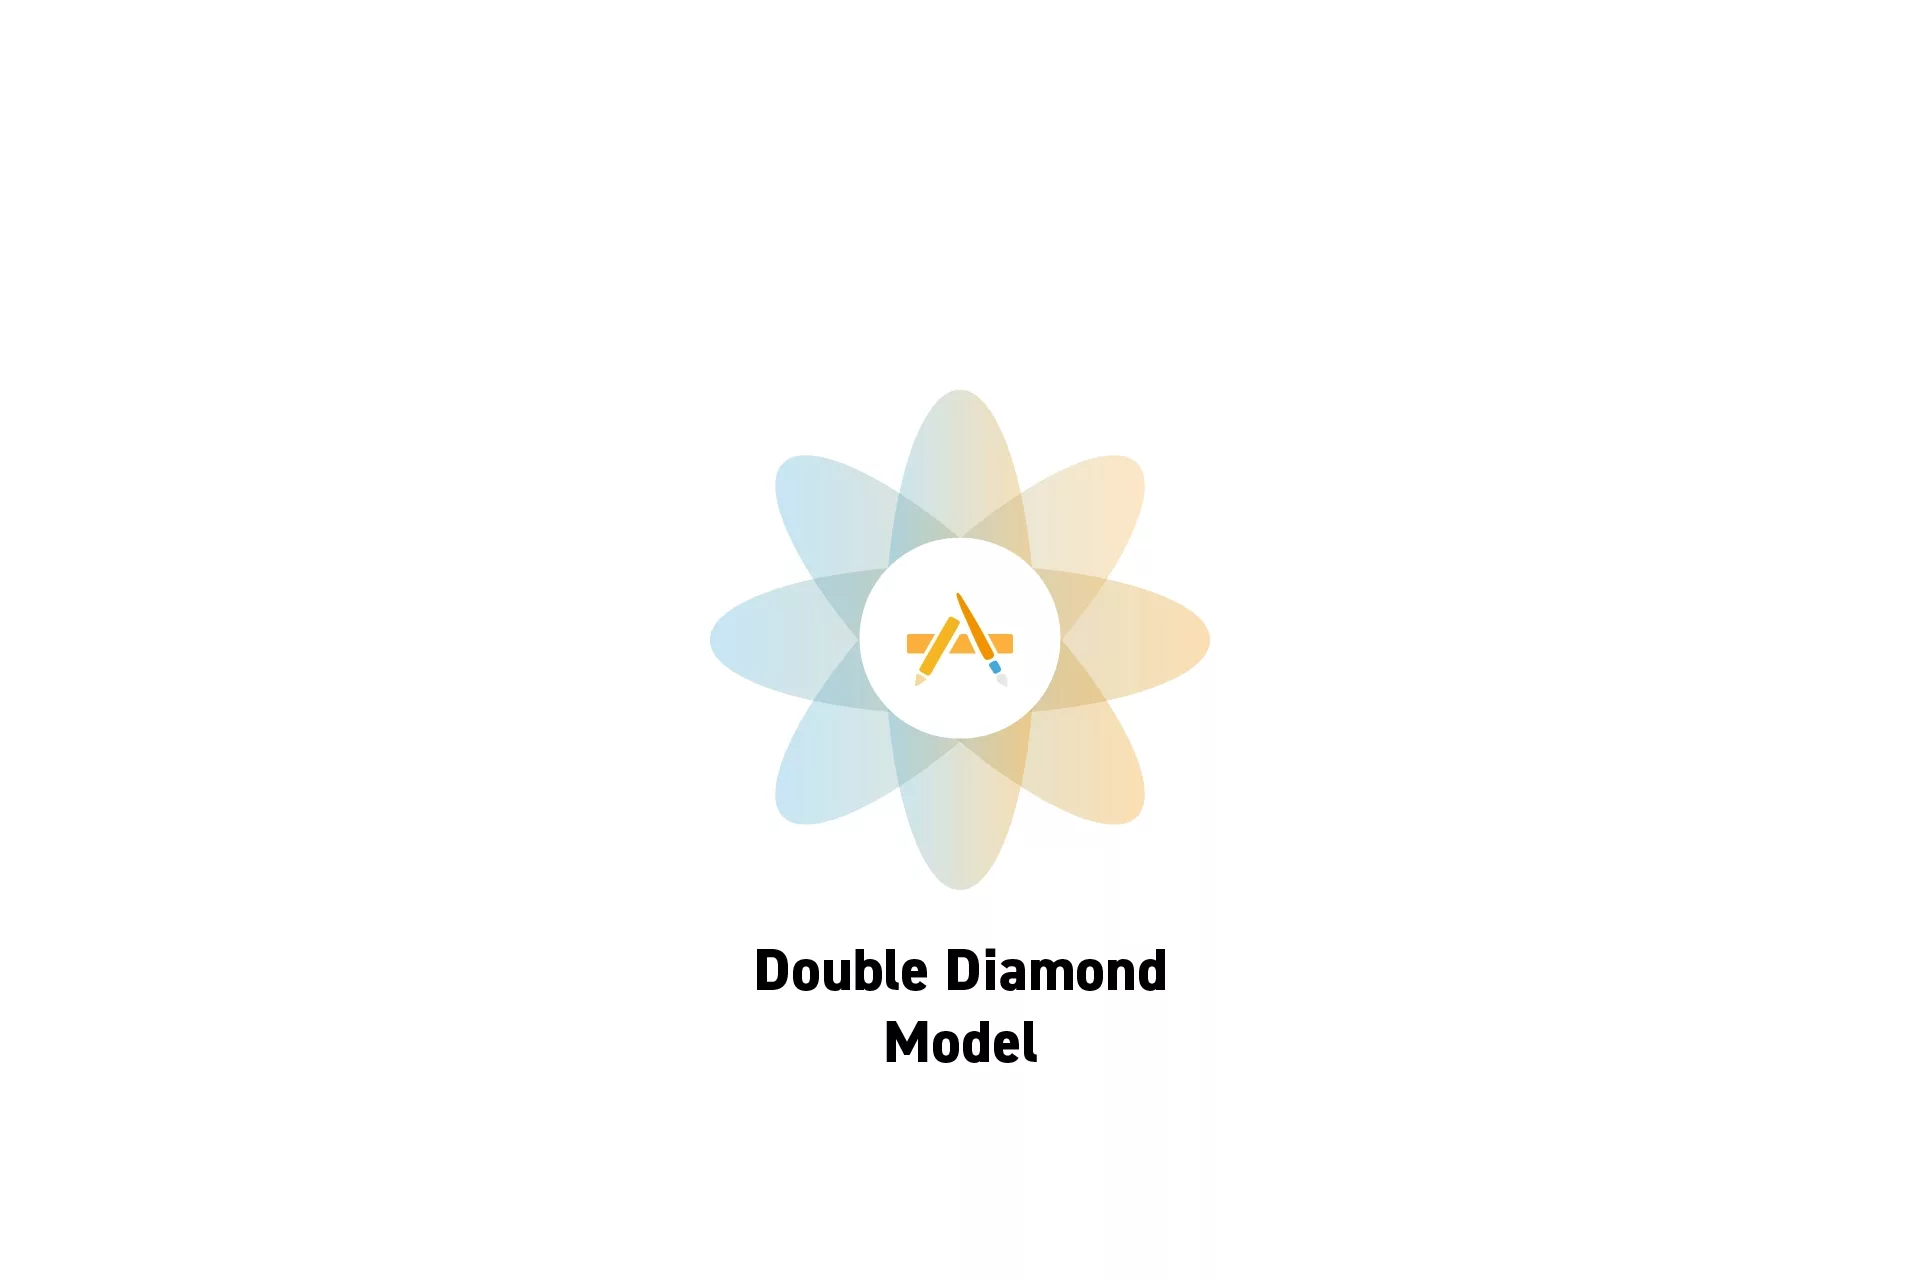 A flower that represents Digital Craft with the text "Double Diamond Model" beneath it.